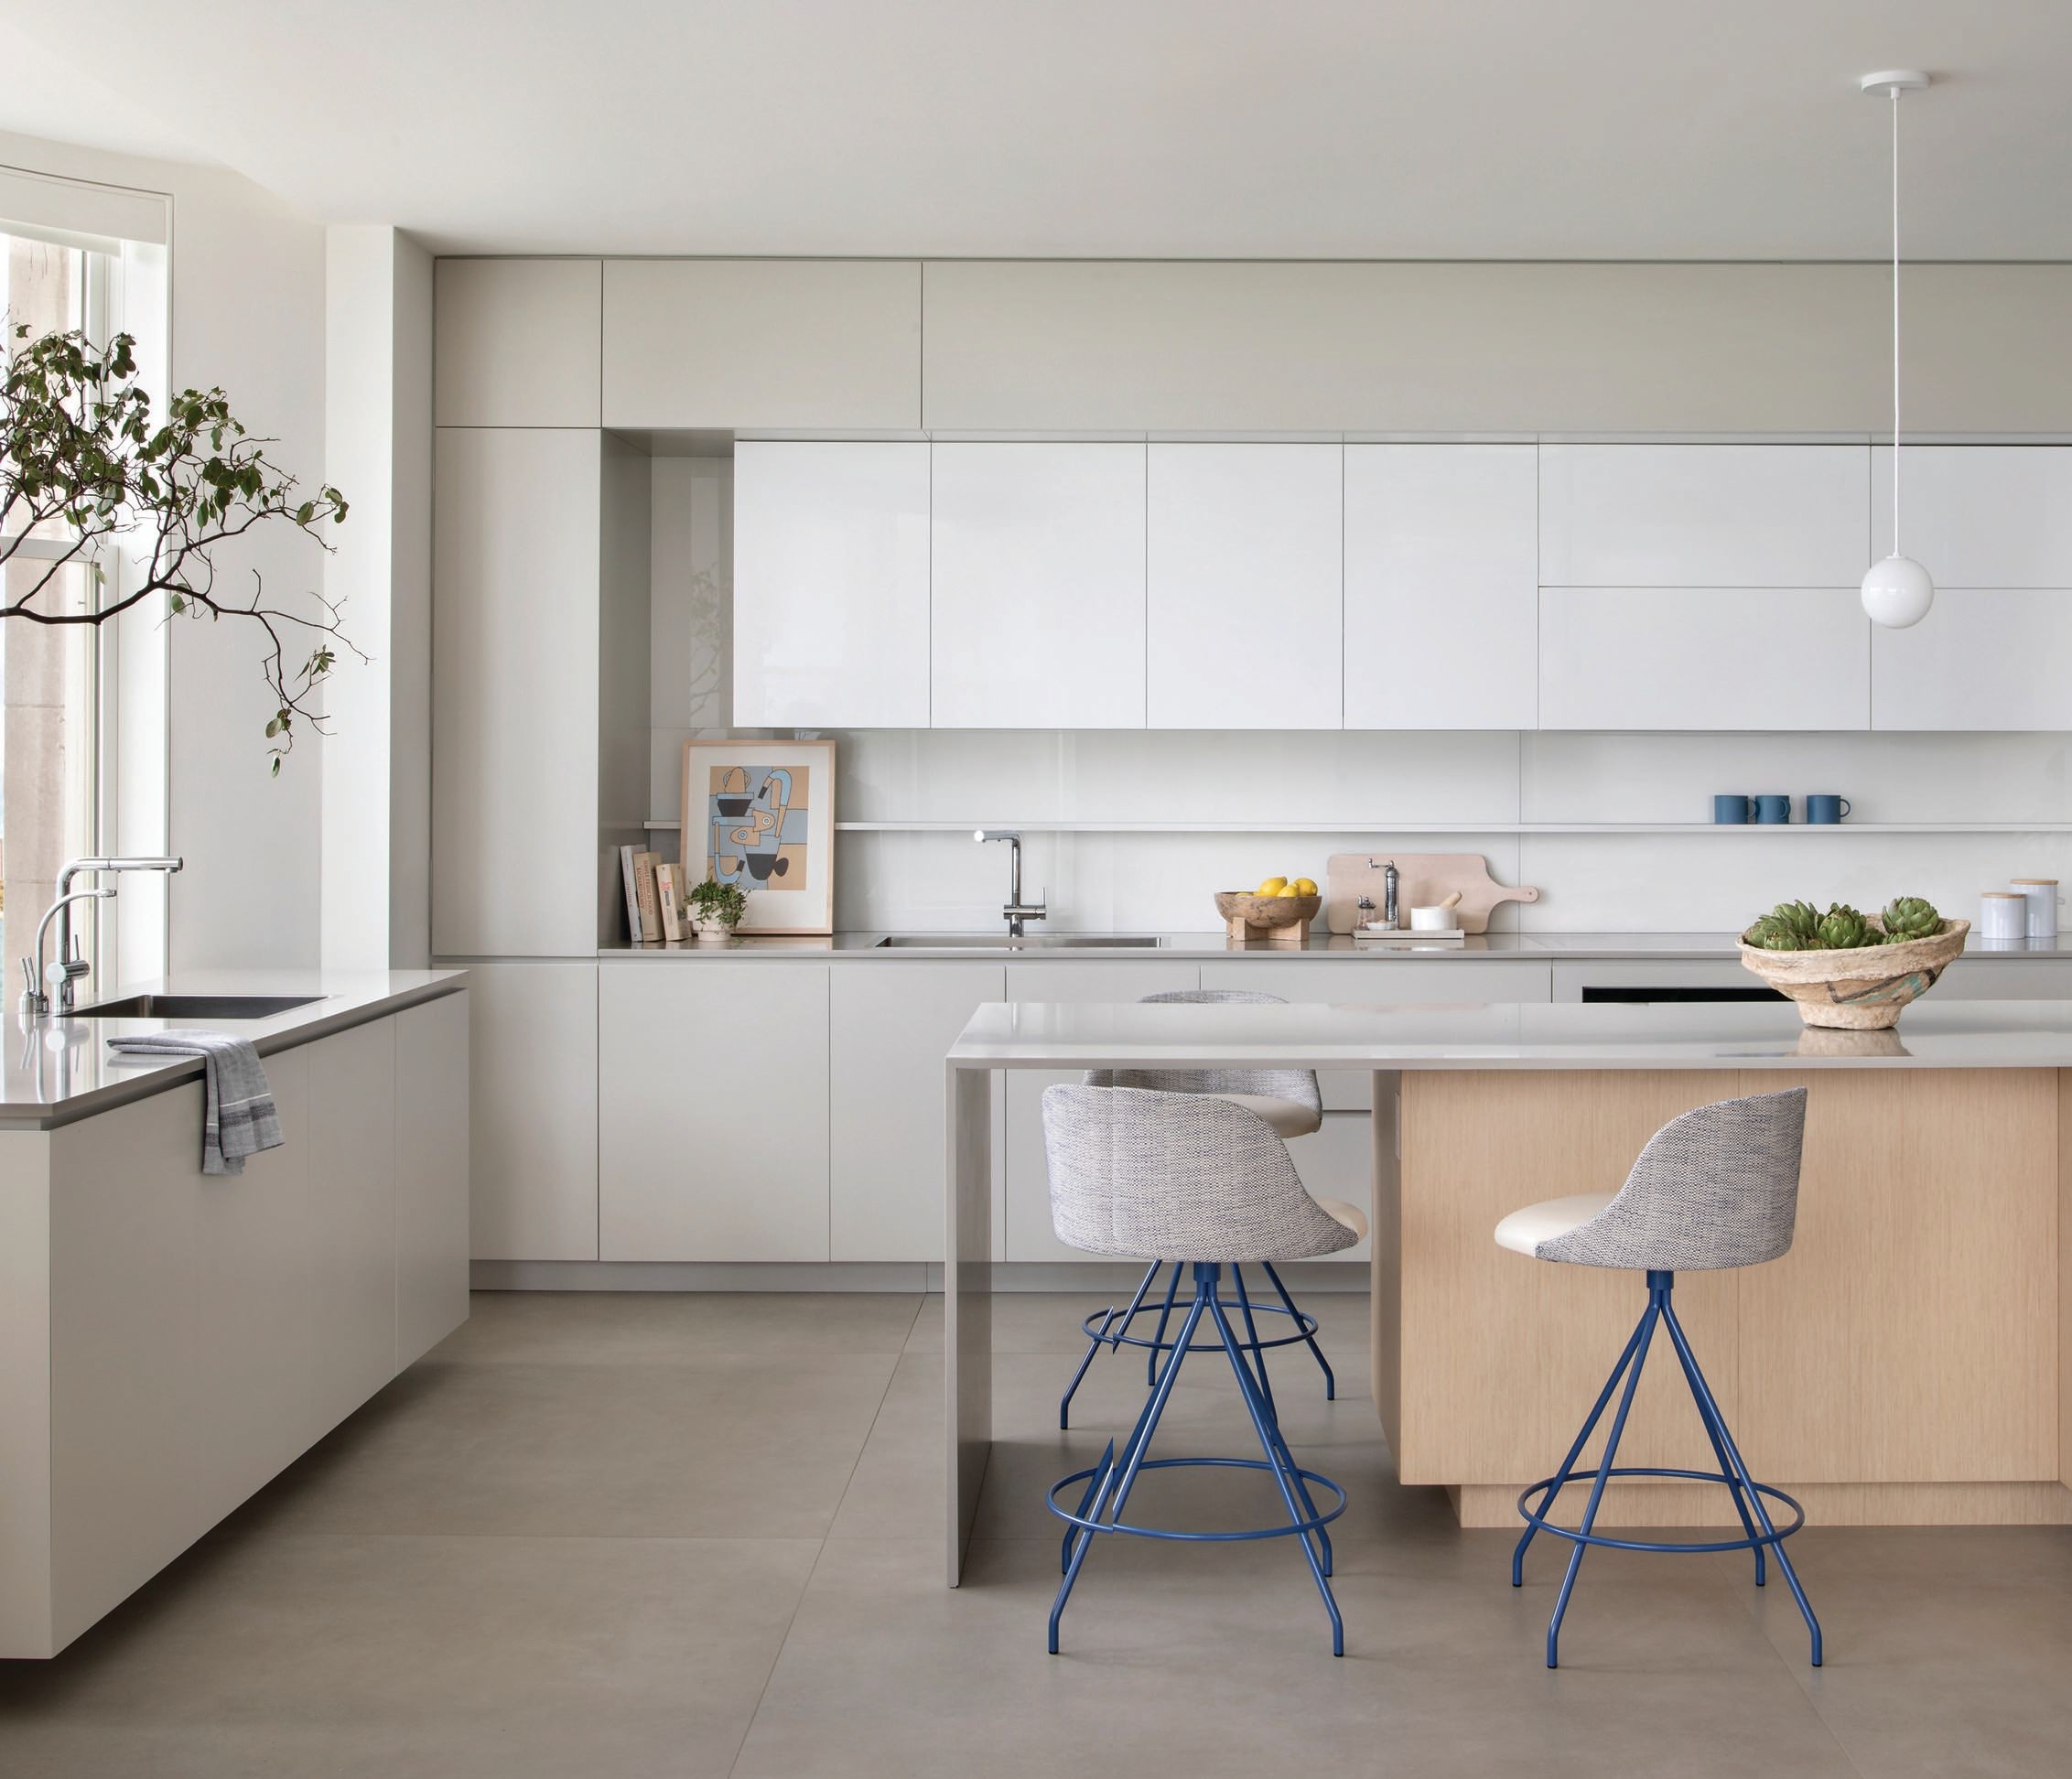 Stone Italiana countertops in Cartapietra Greige and cabinetry by Peter Chasak set a soothing, stylish tone in the kitchen Photographed by Gibeon Photography